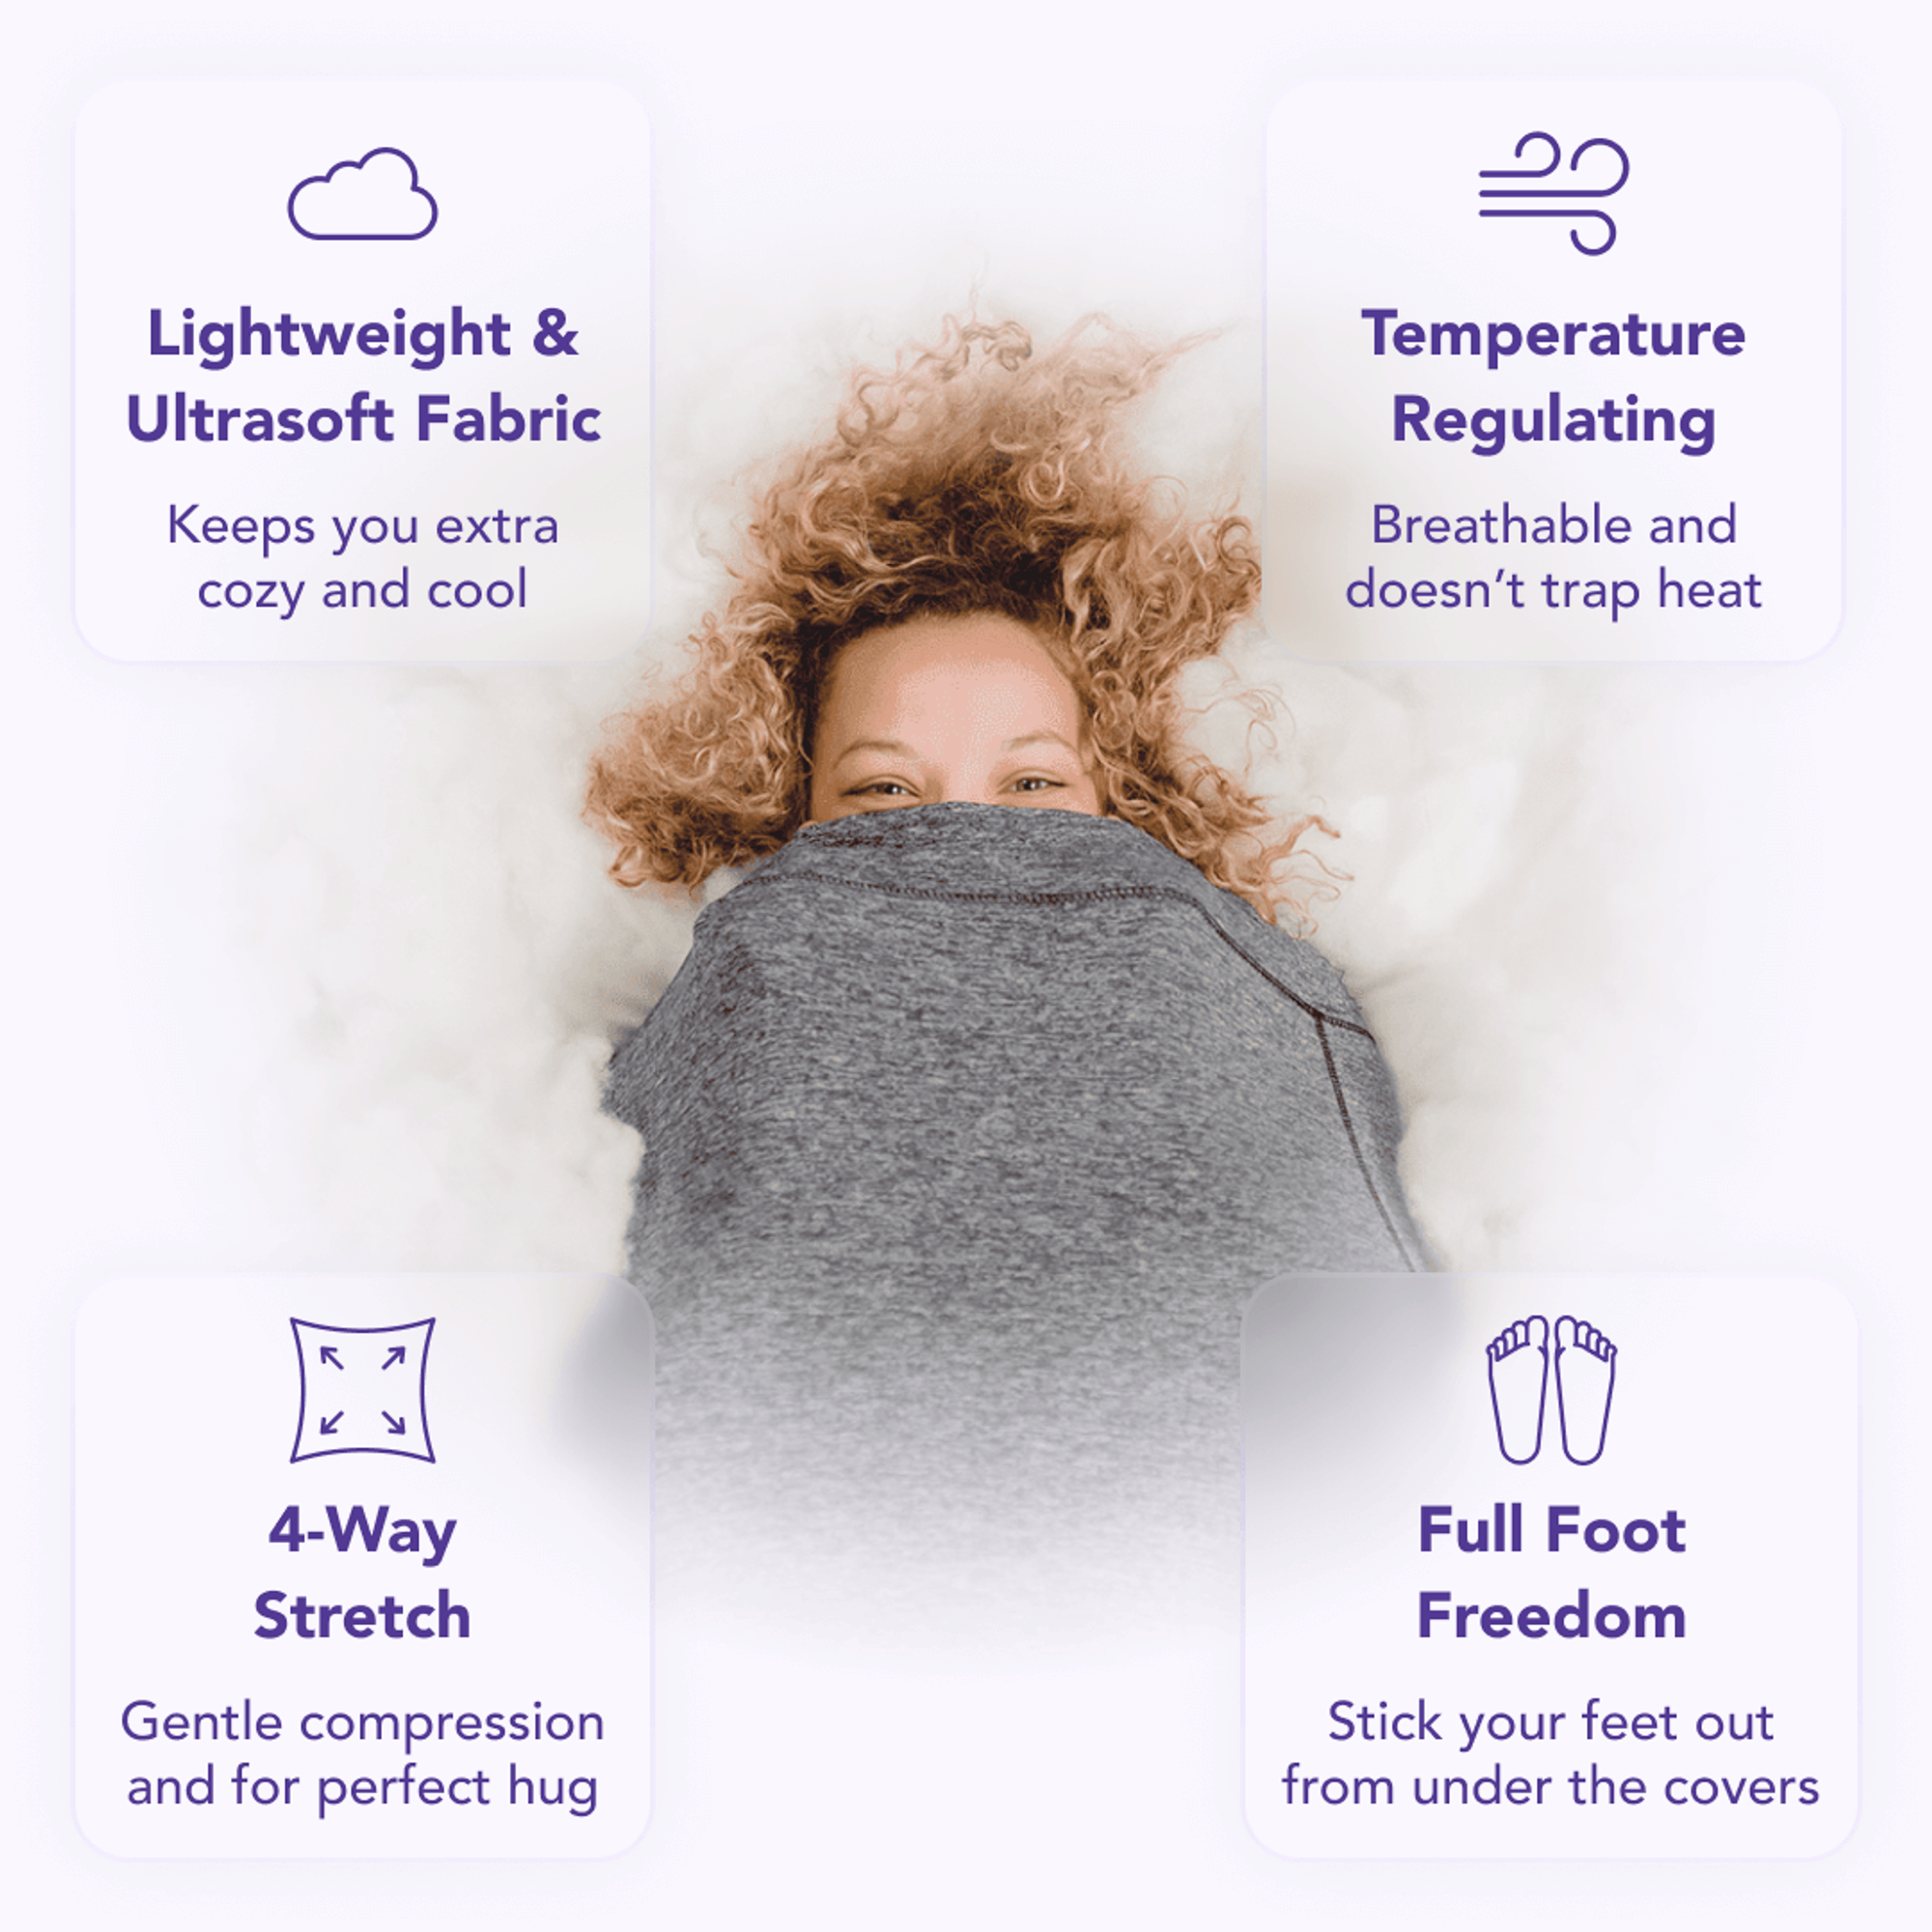 Woman in Sleep Pod Hood in bed laying down. Sleep pod is lightweight, temperature regulating, has 4-way stretch material and full feet freedom